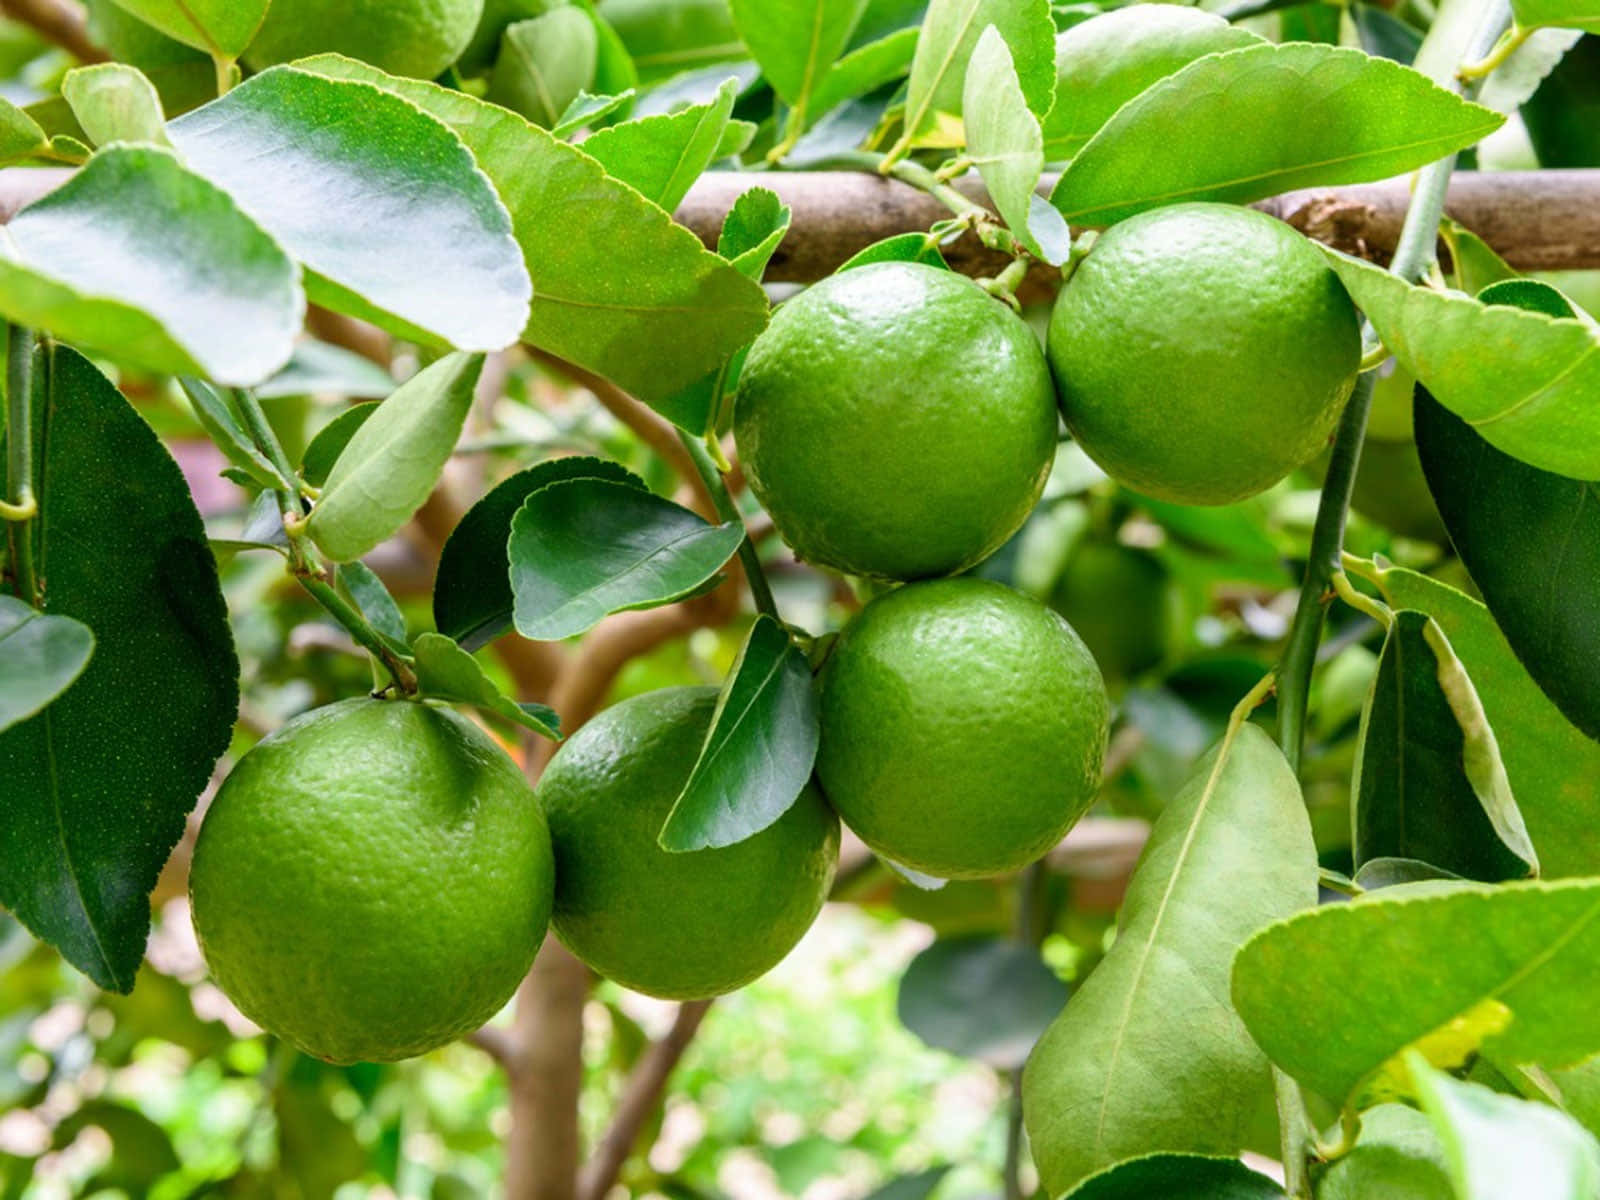 Lime Tree With Green Fruits